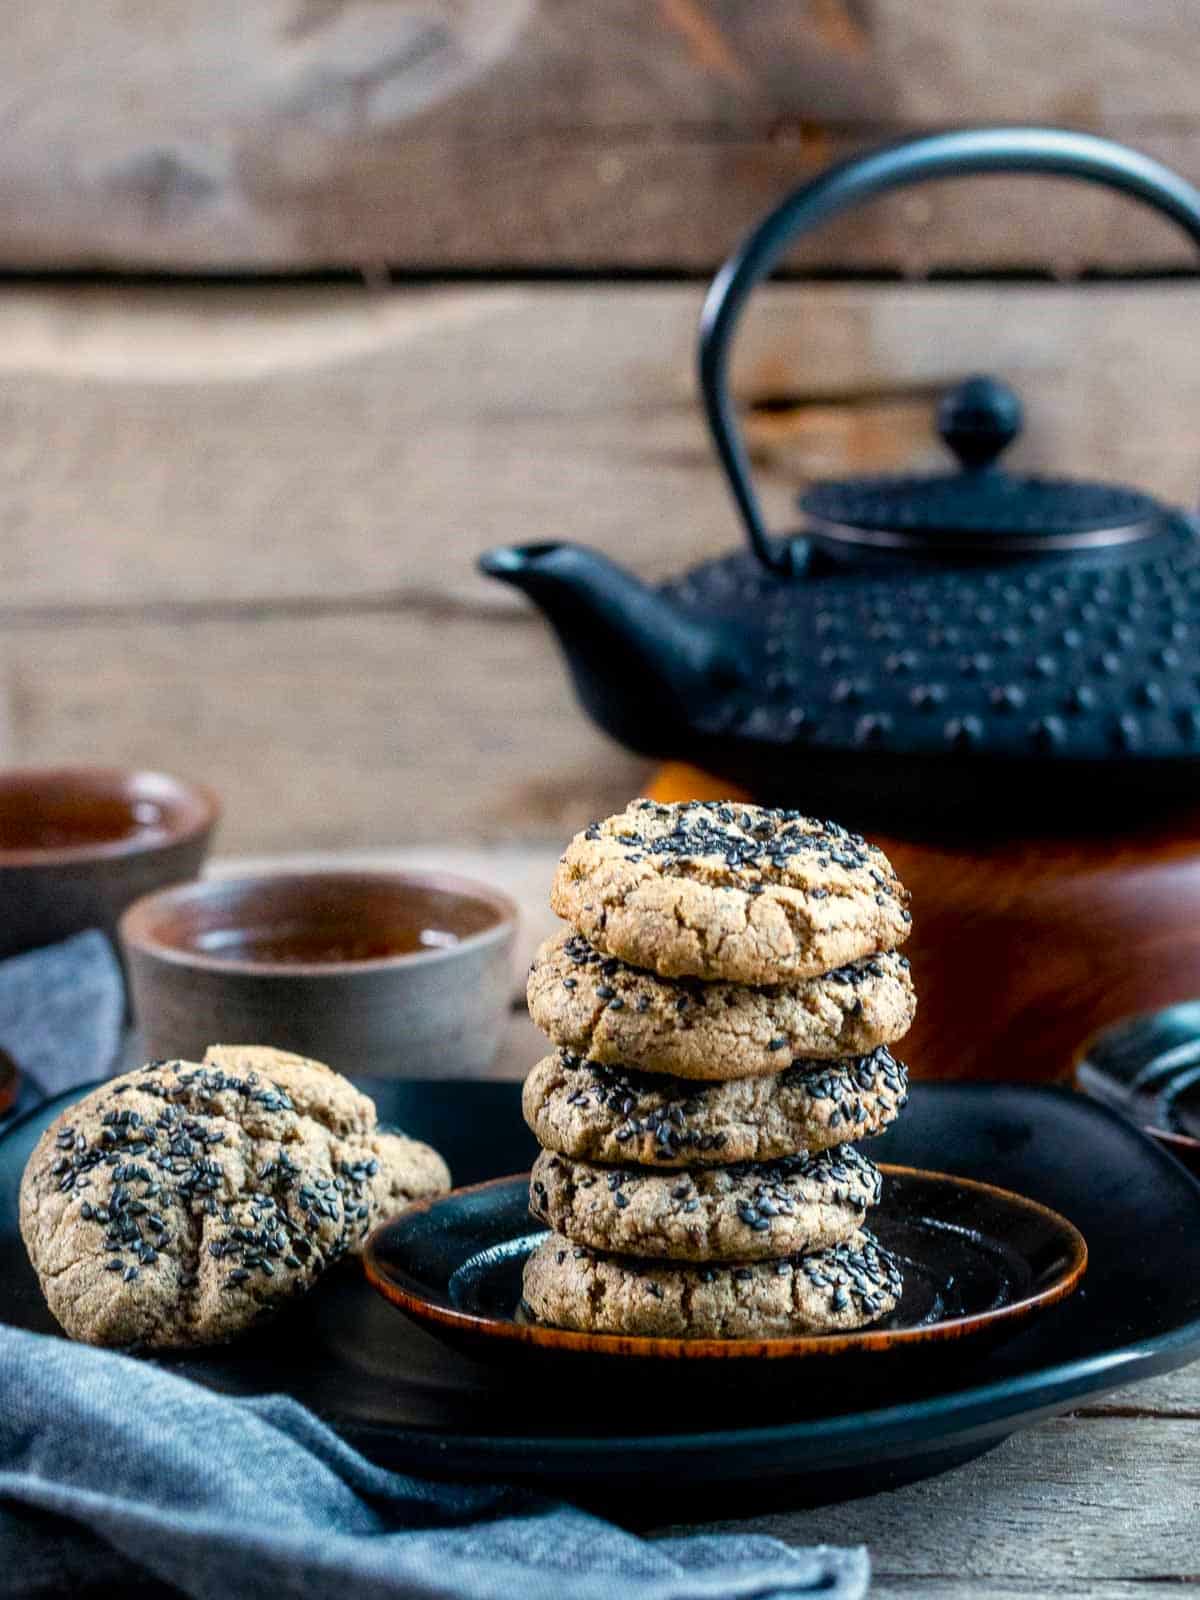 https://www.hwcmagazine.com/wp-content/uploads/2014/08/Chewy-Black-Sesame-Cookies-UPDATED-LONG-8918.jpg